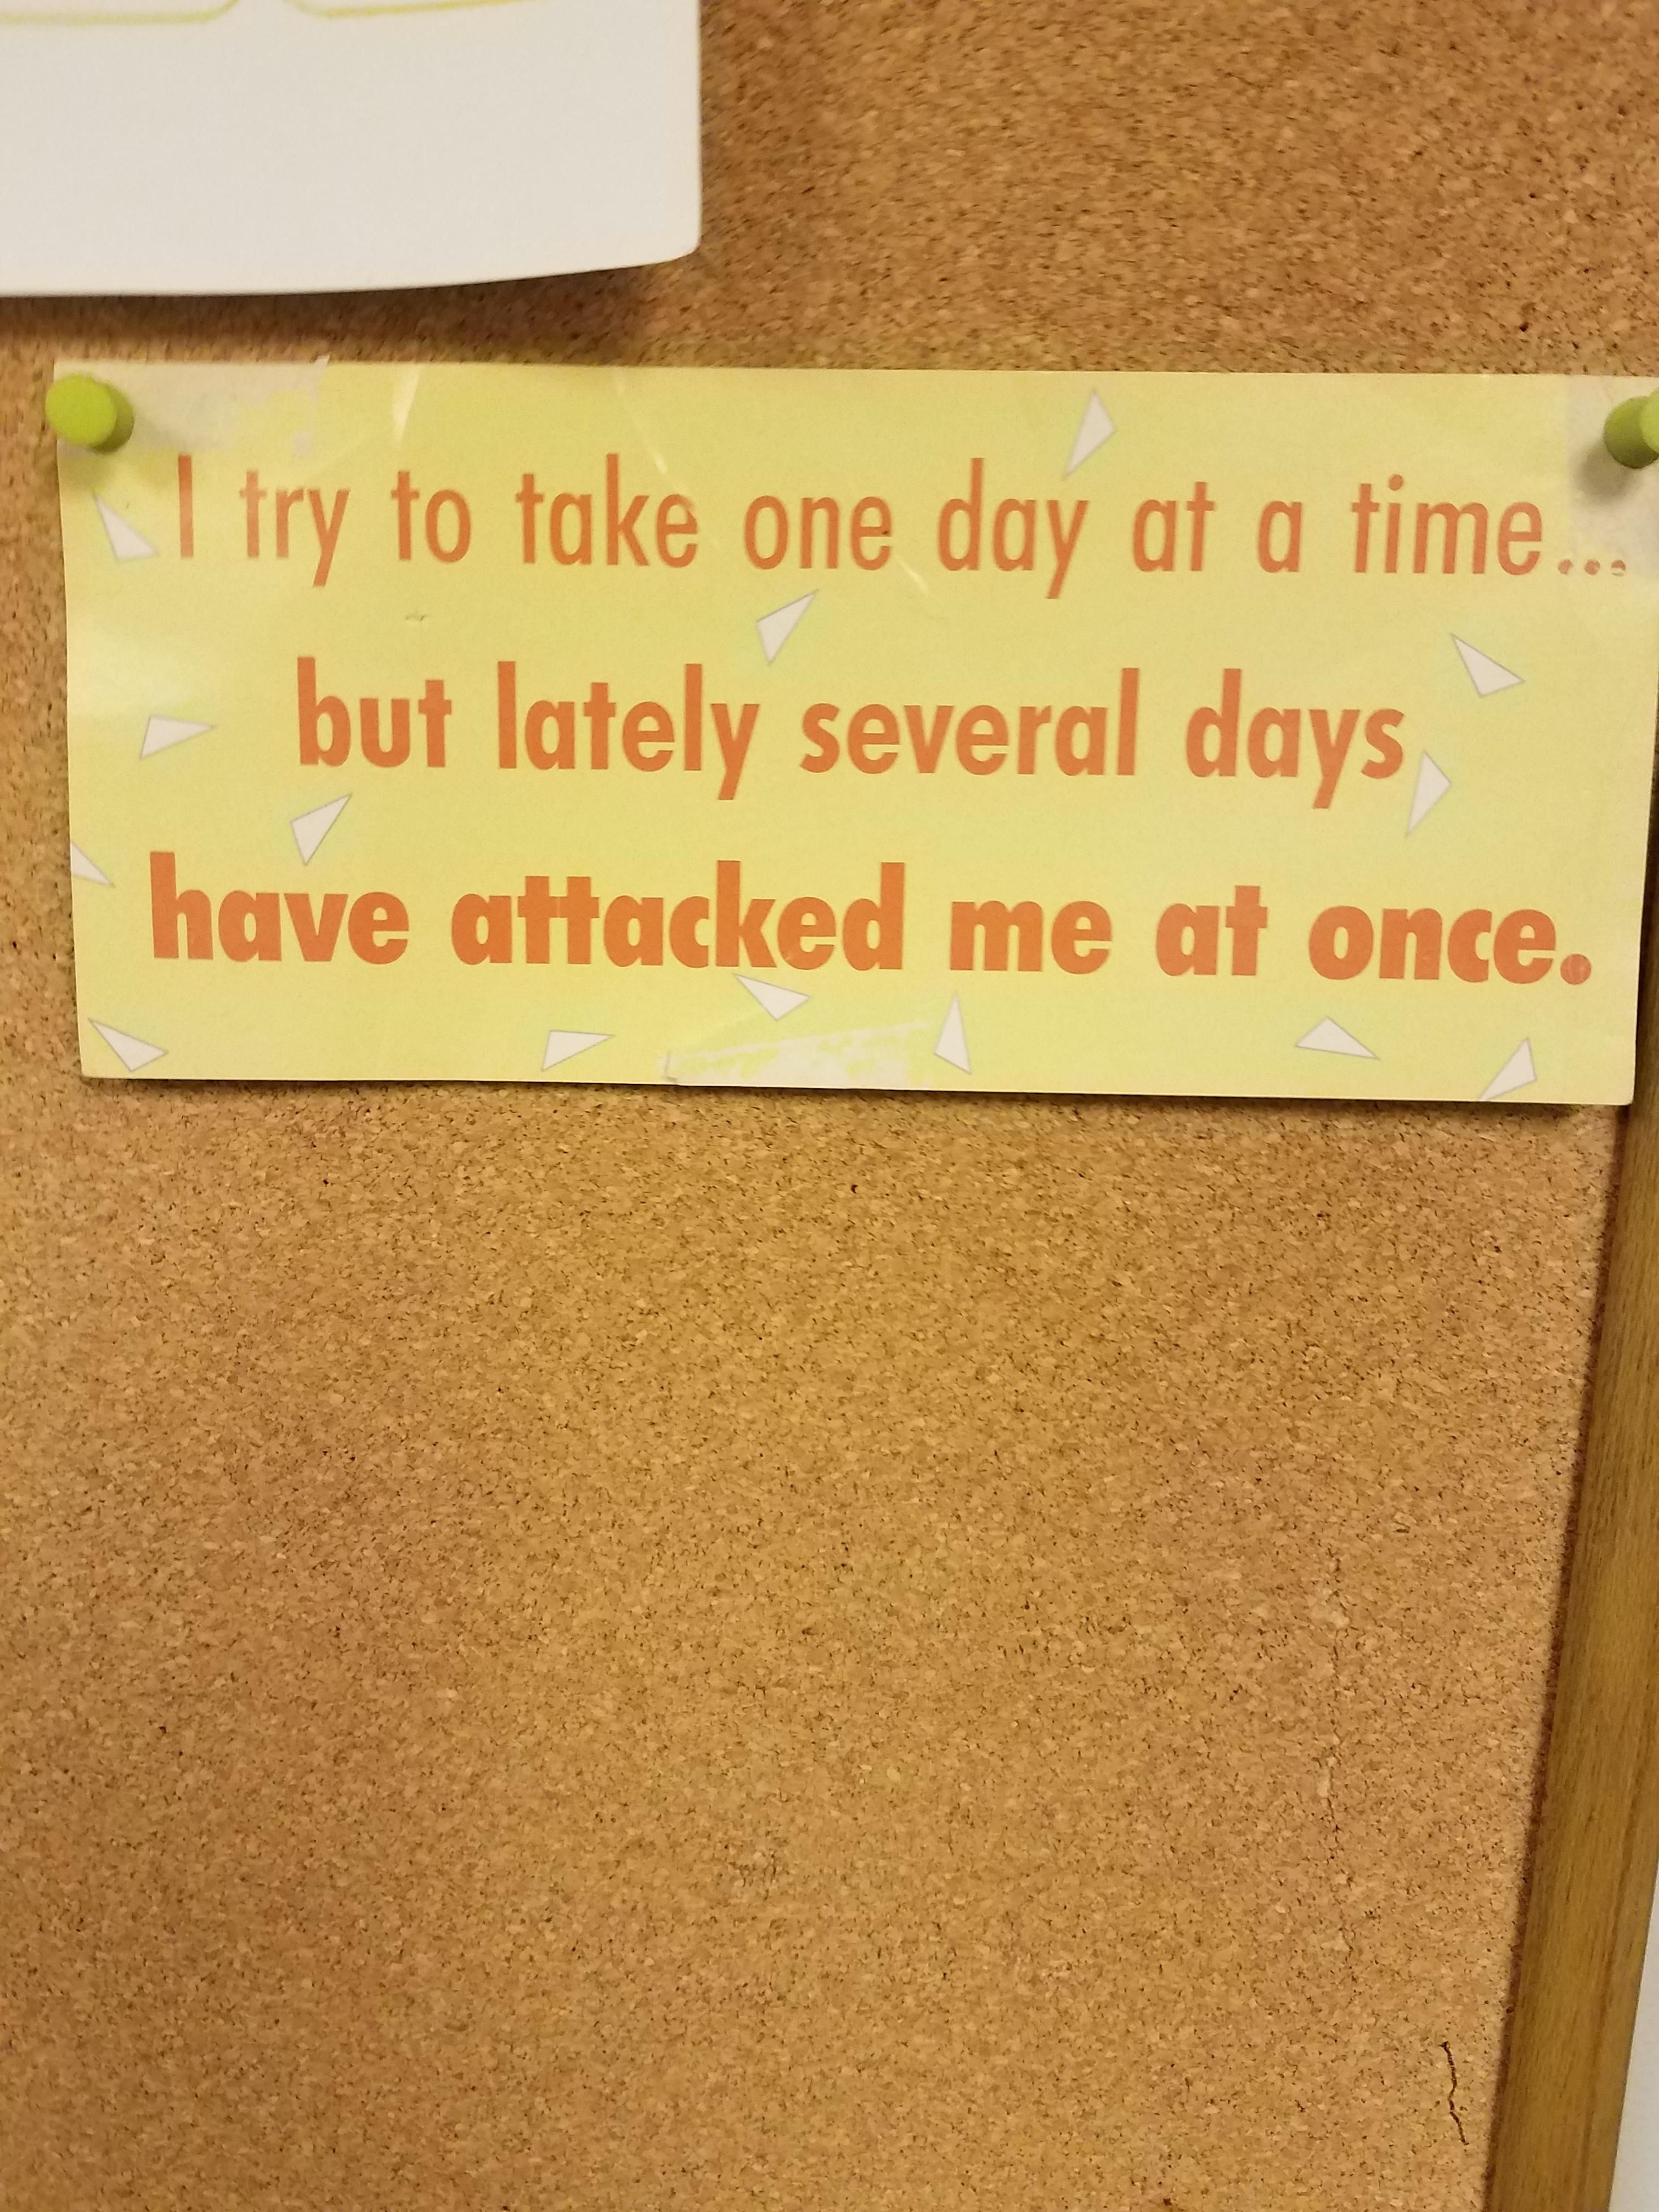 In the office at work. We all know the feeling.